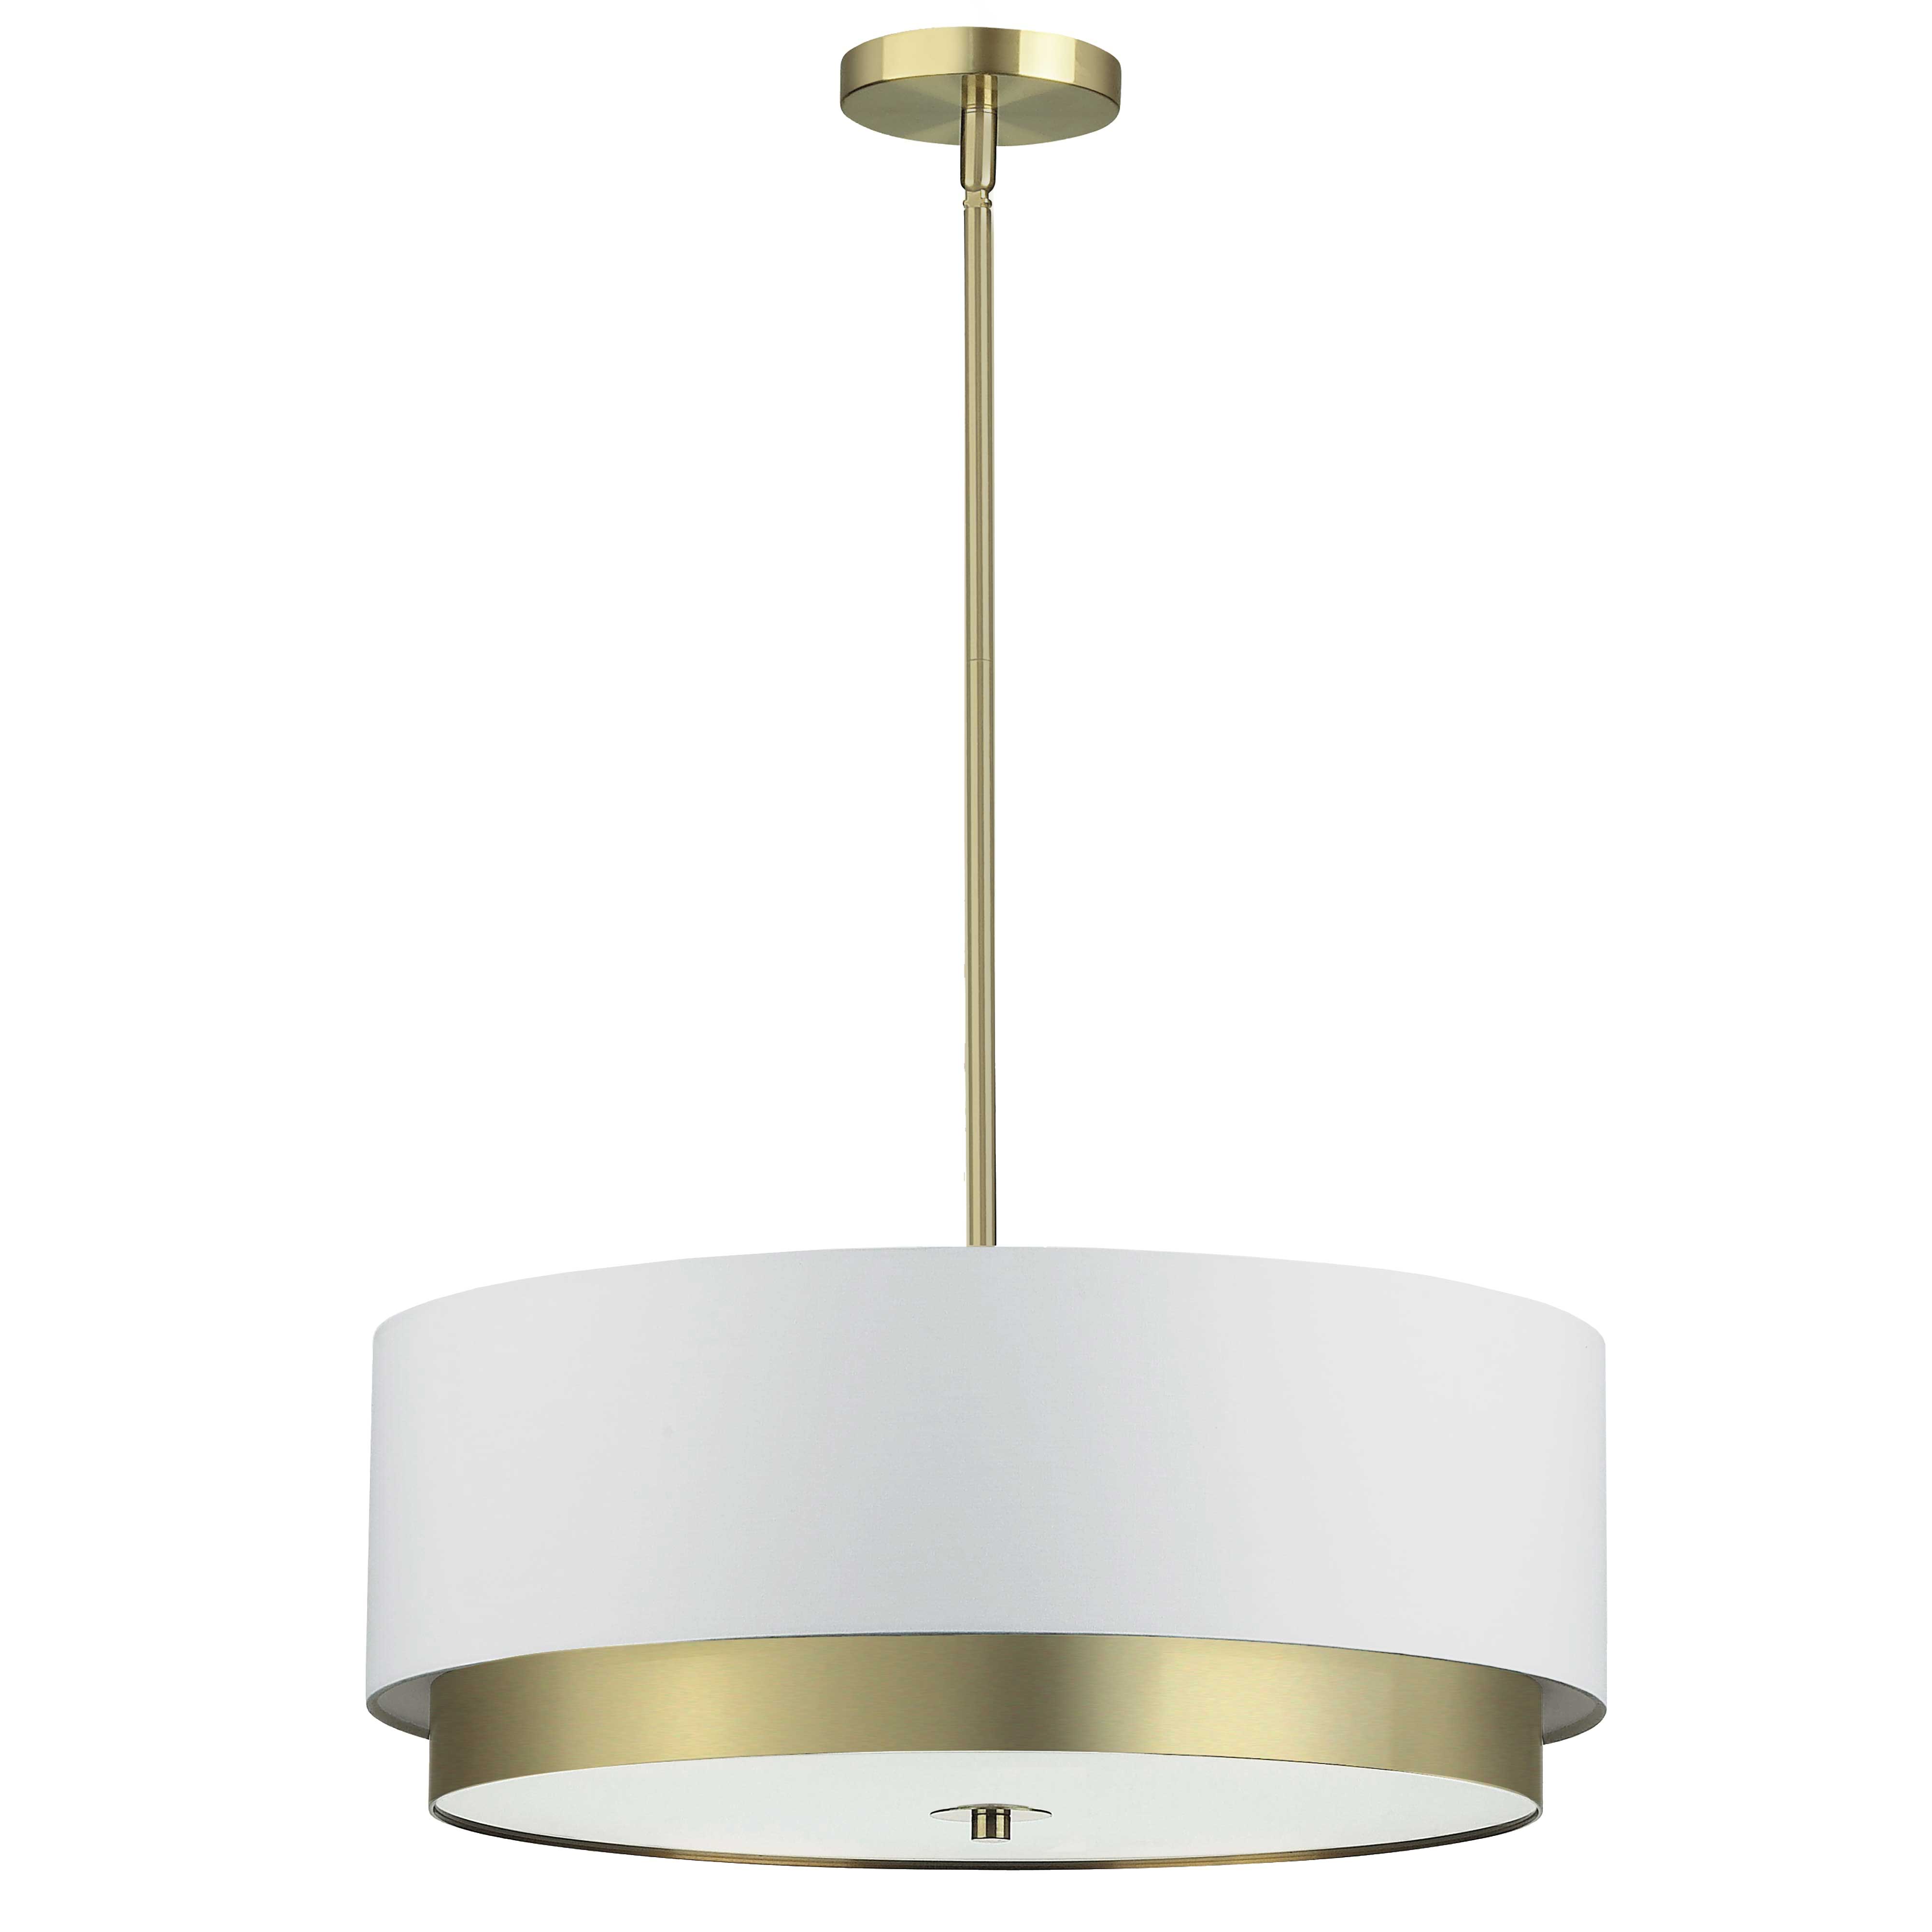 4 Light Large Pendant, Aged Brass with White Shade, Frosted Glass Diffuser